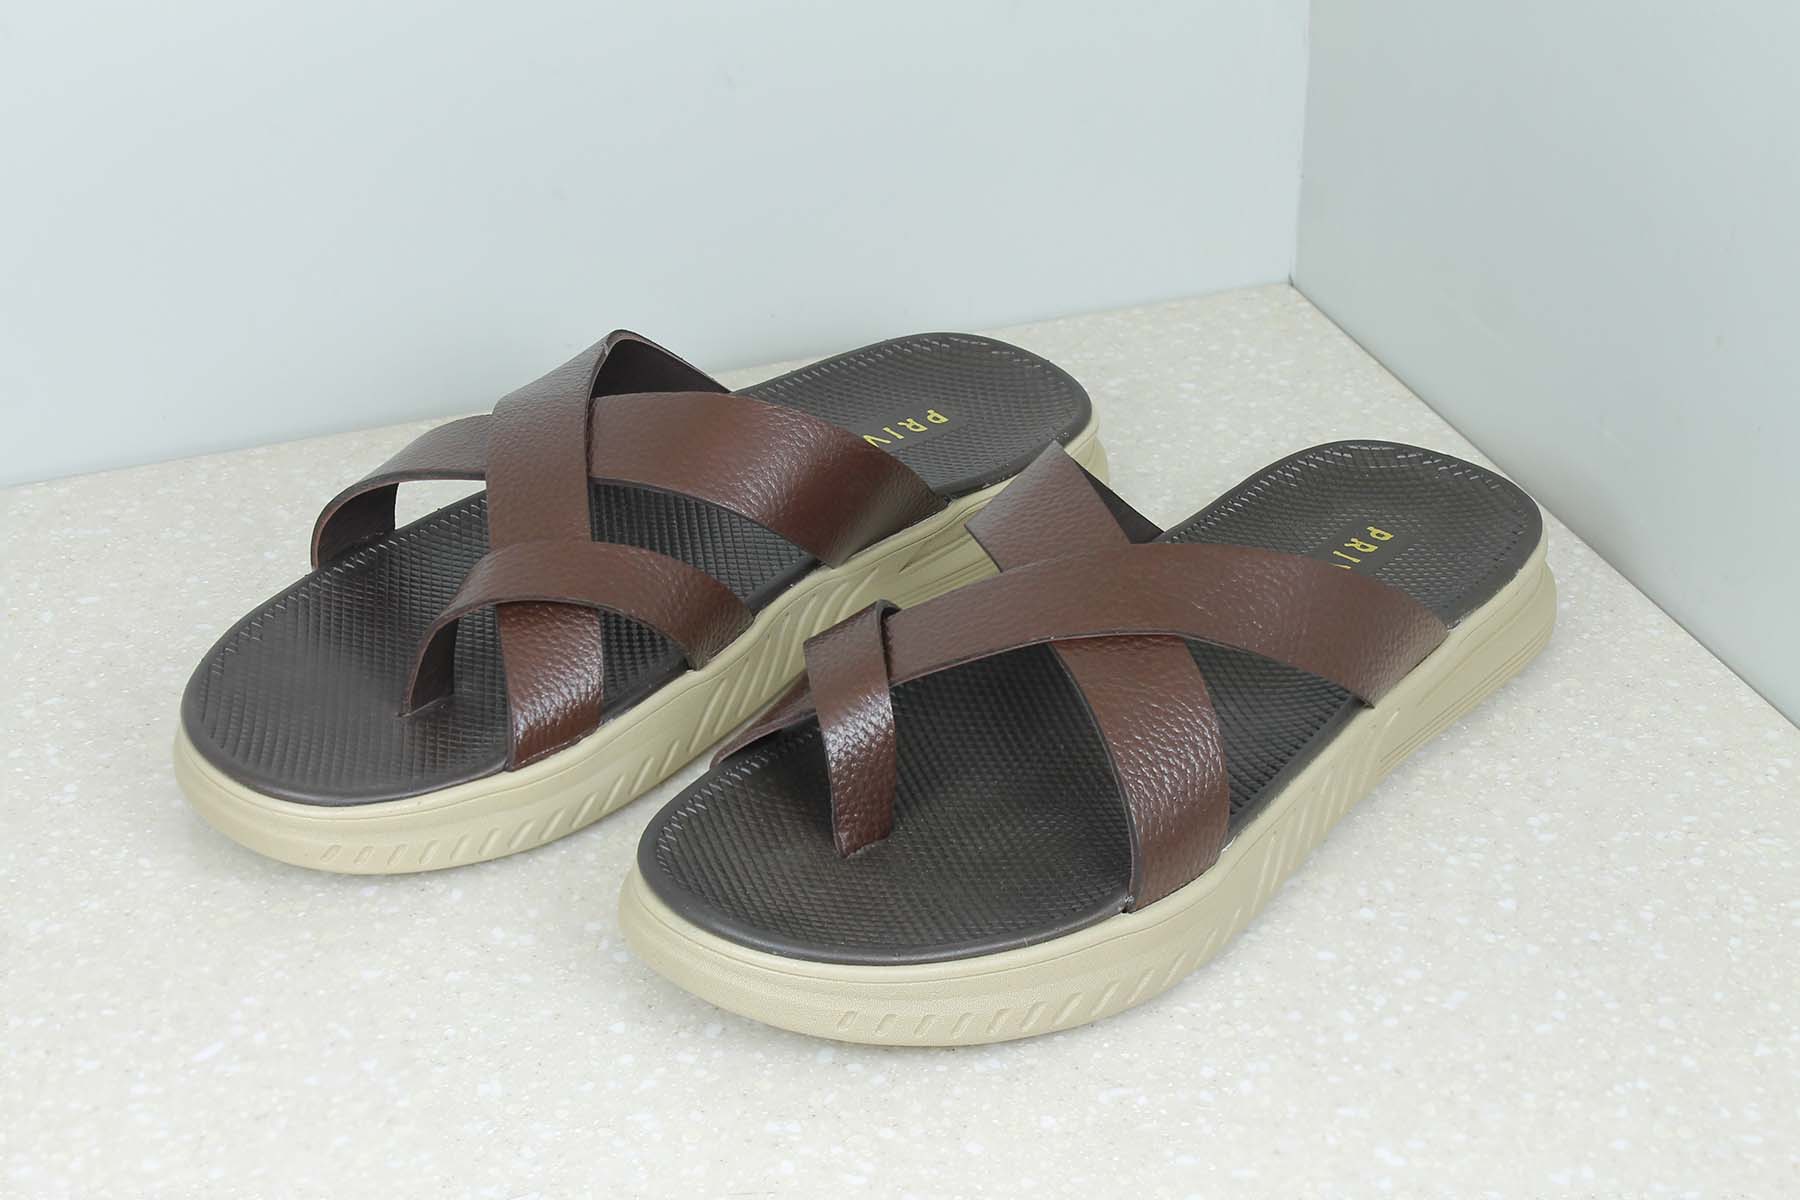 THONG CASUAL SLIPPER-BROWN-Men's Slippers-Inc5 Shoes